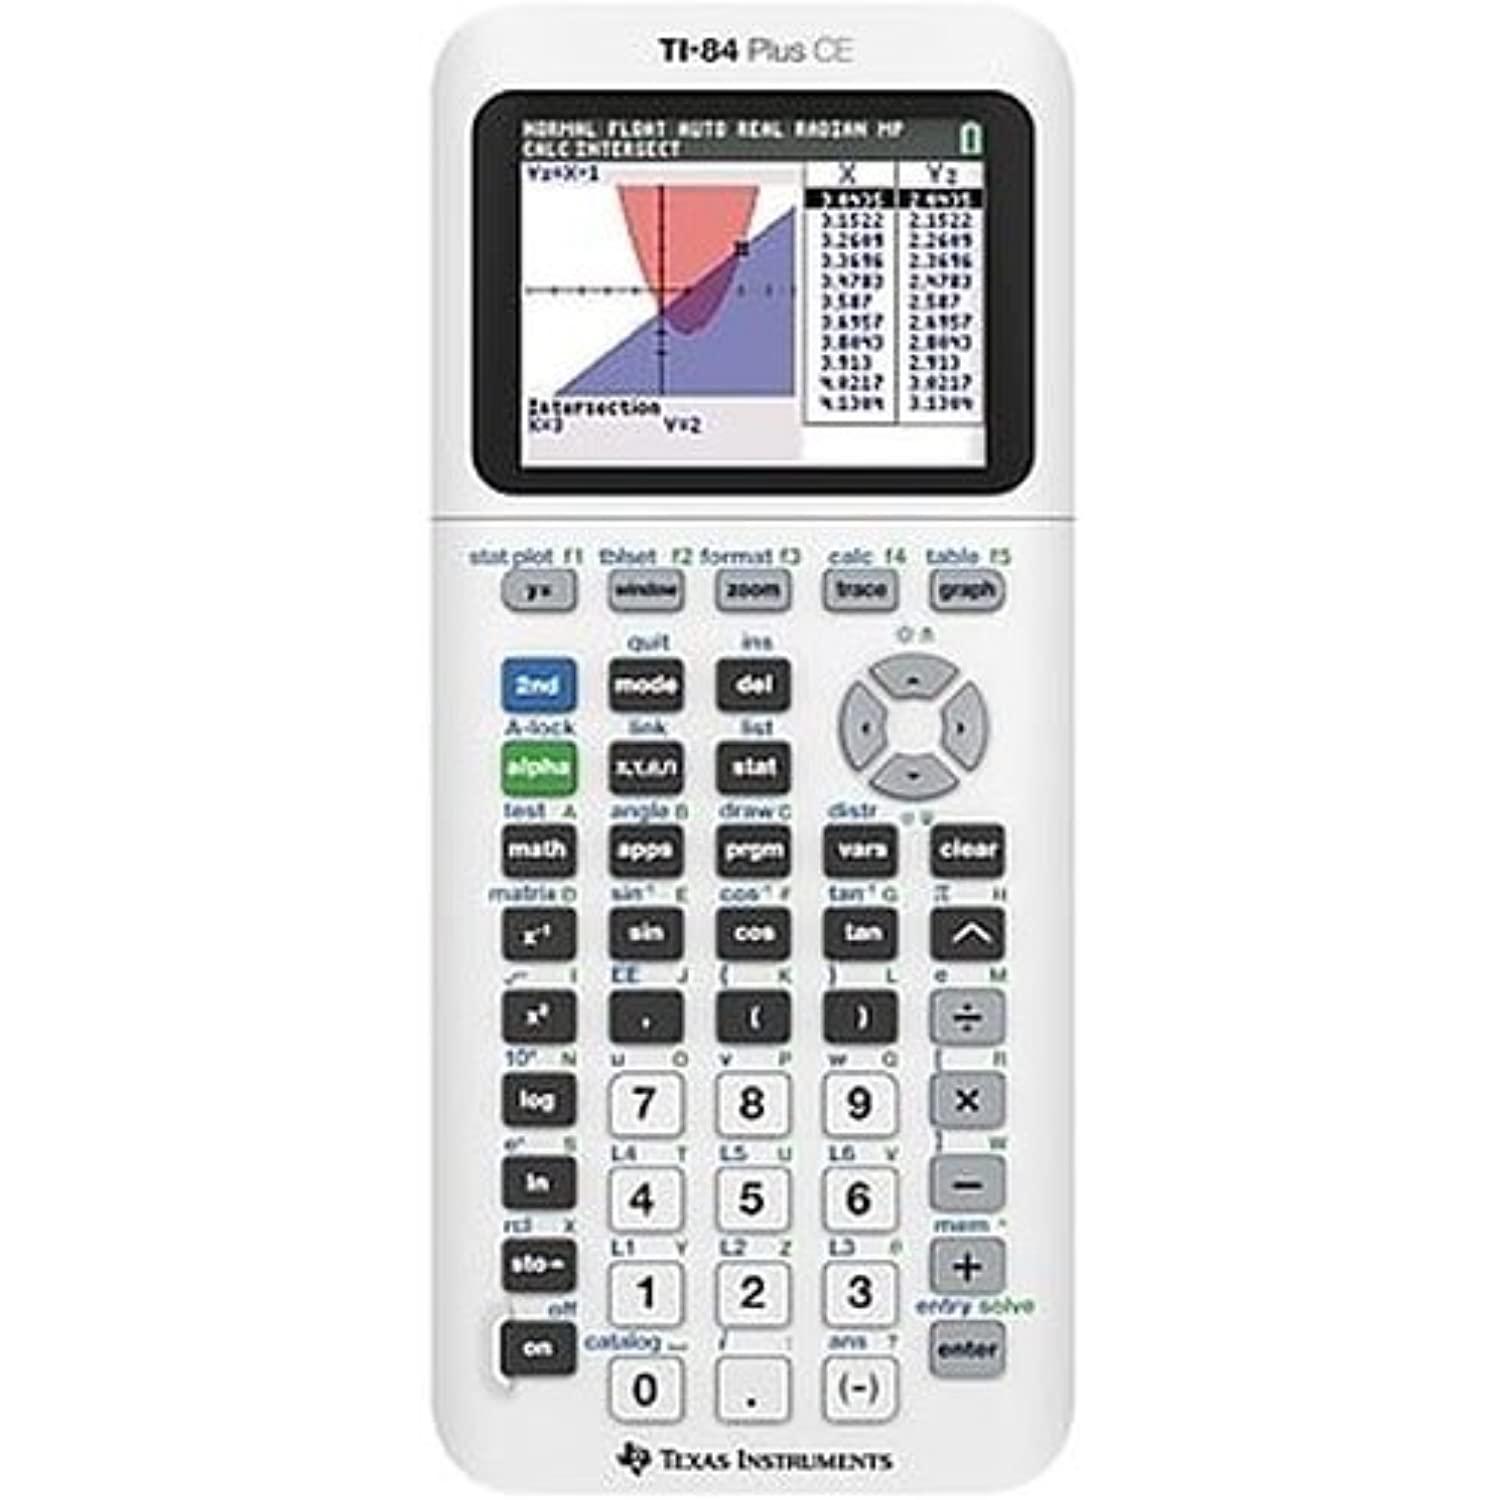 Texas Instruments TI-84 Plus CE Color Graphing Calculator for $92 Shipped